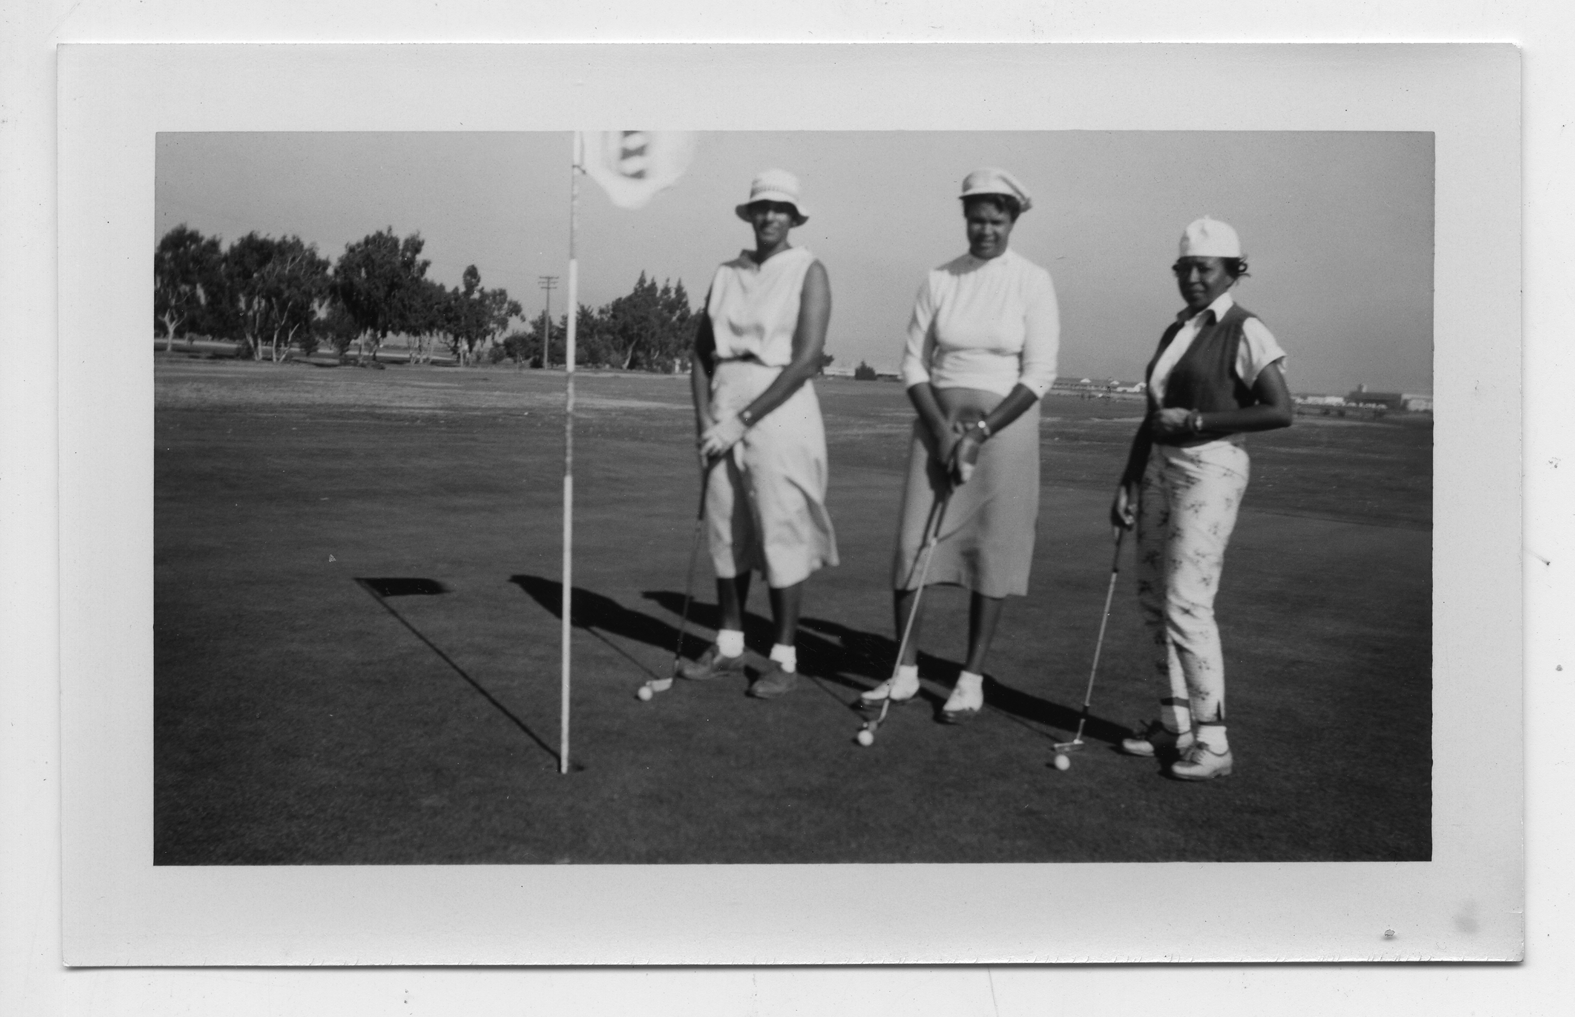 Dr. George Grant and Evolution of the Golf Tee